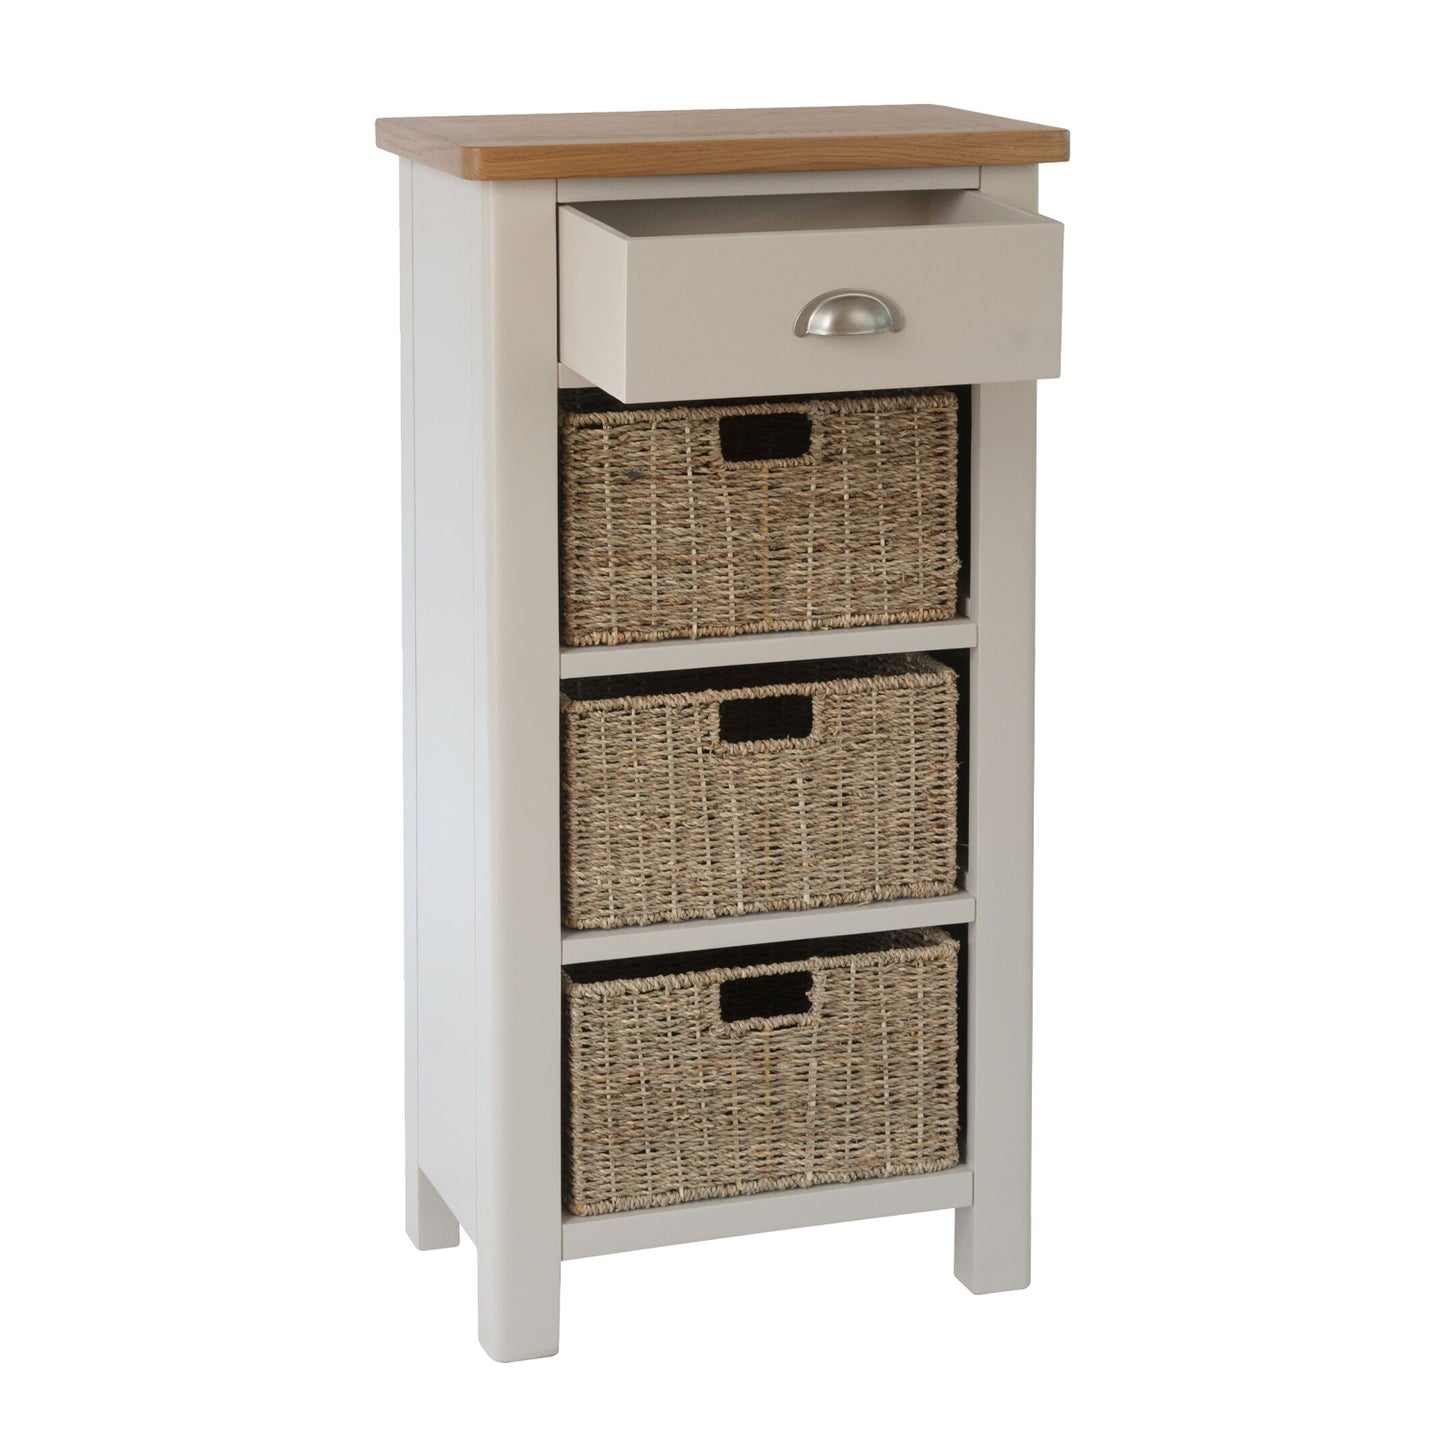 Pershore Painted Tall Side Table - 1 Drawer 3 Baskets